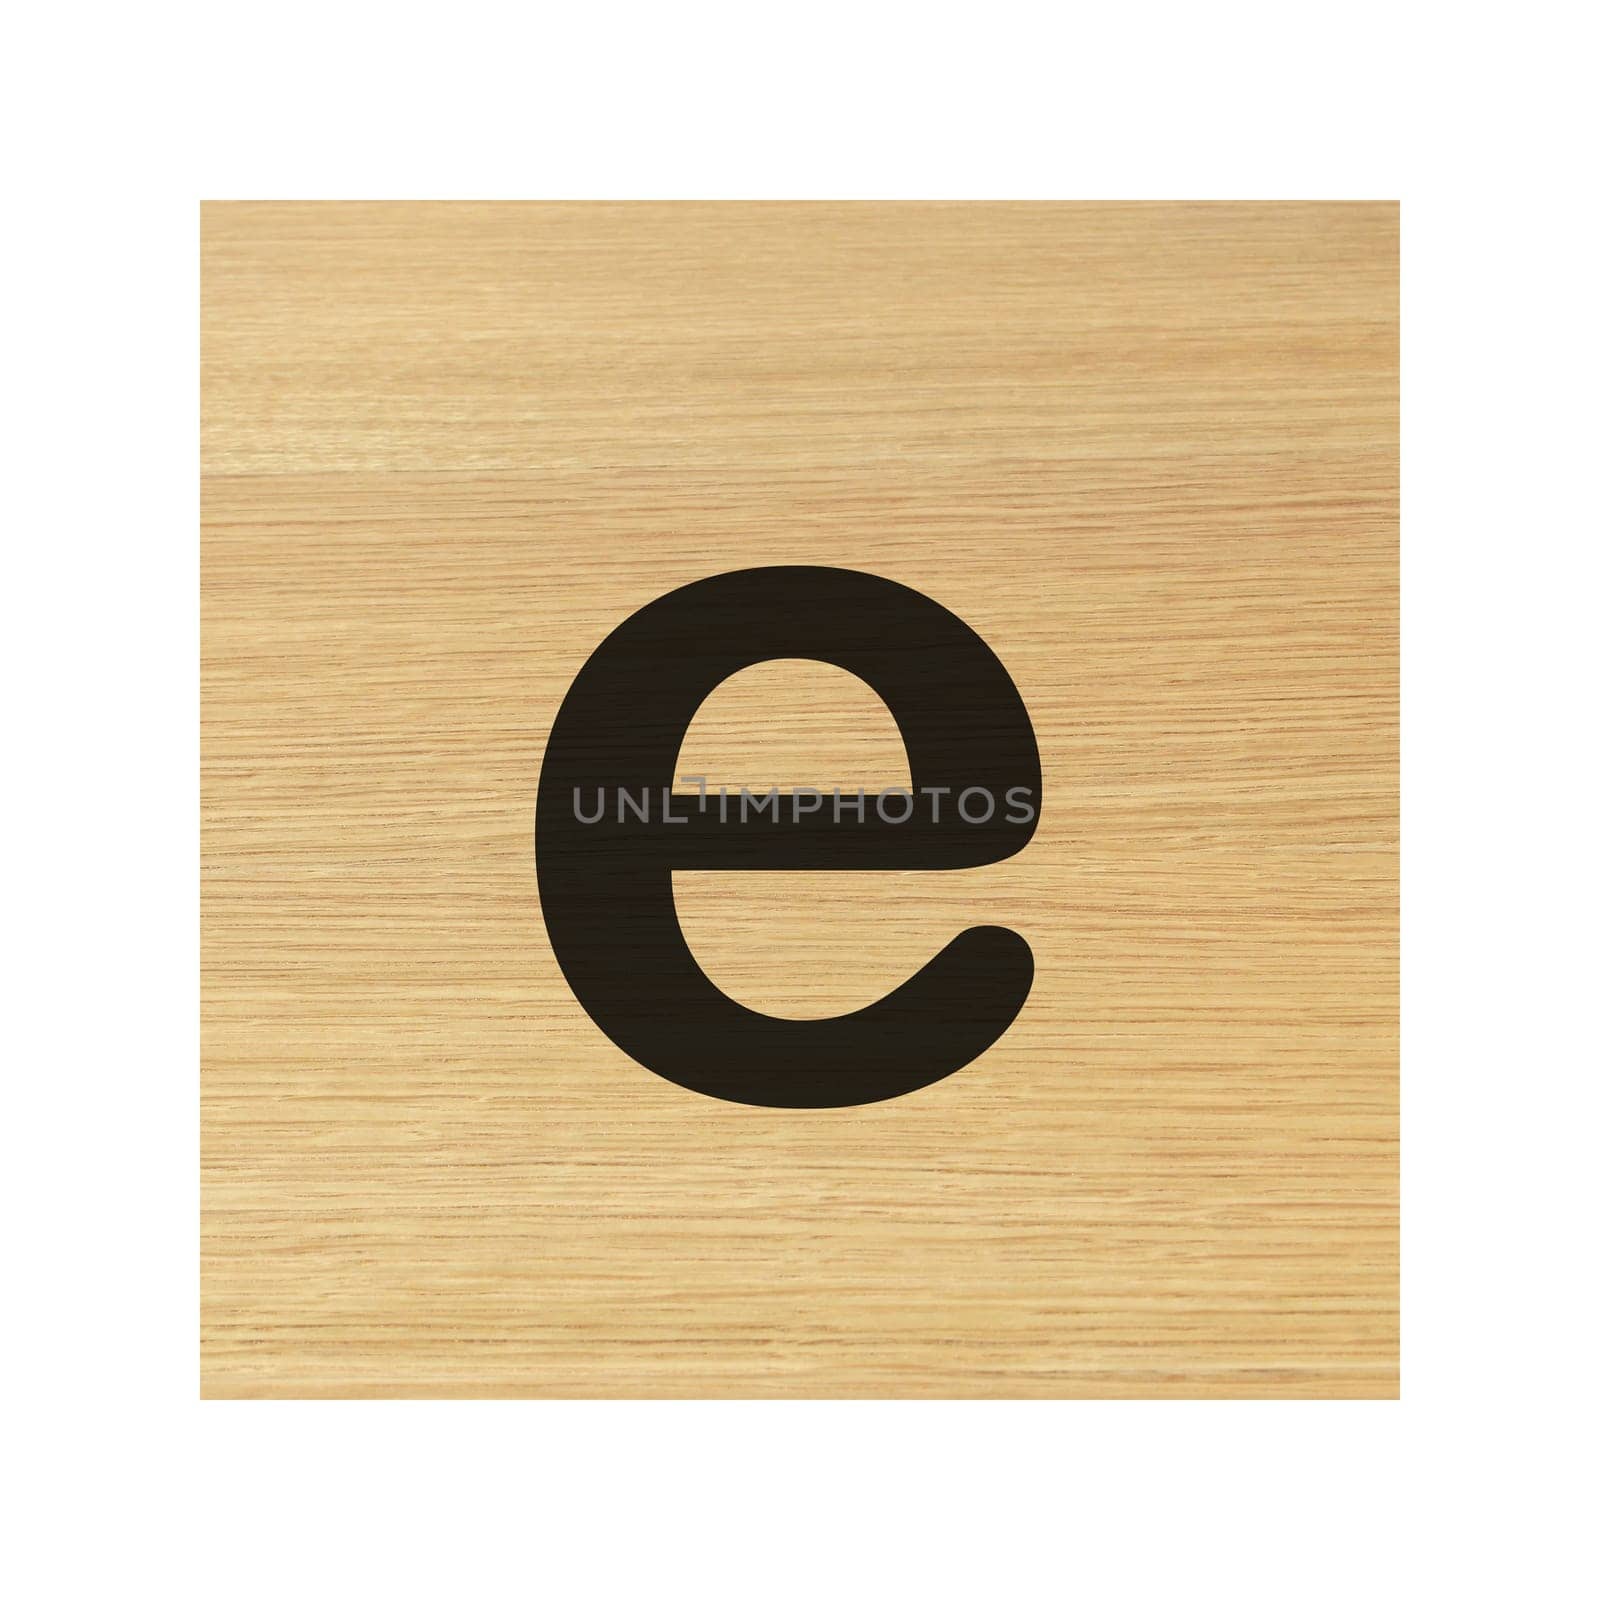 A lower case e wood block on white with clipping path